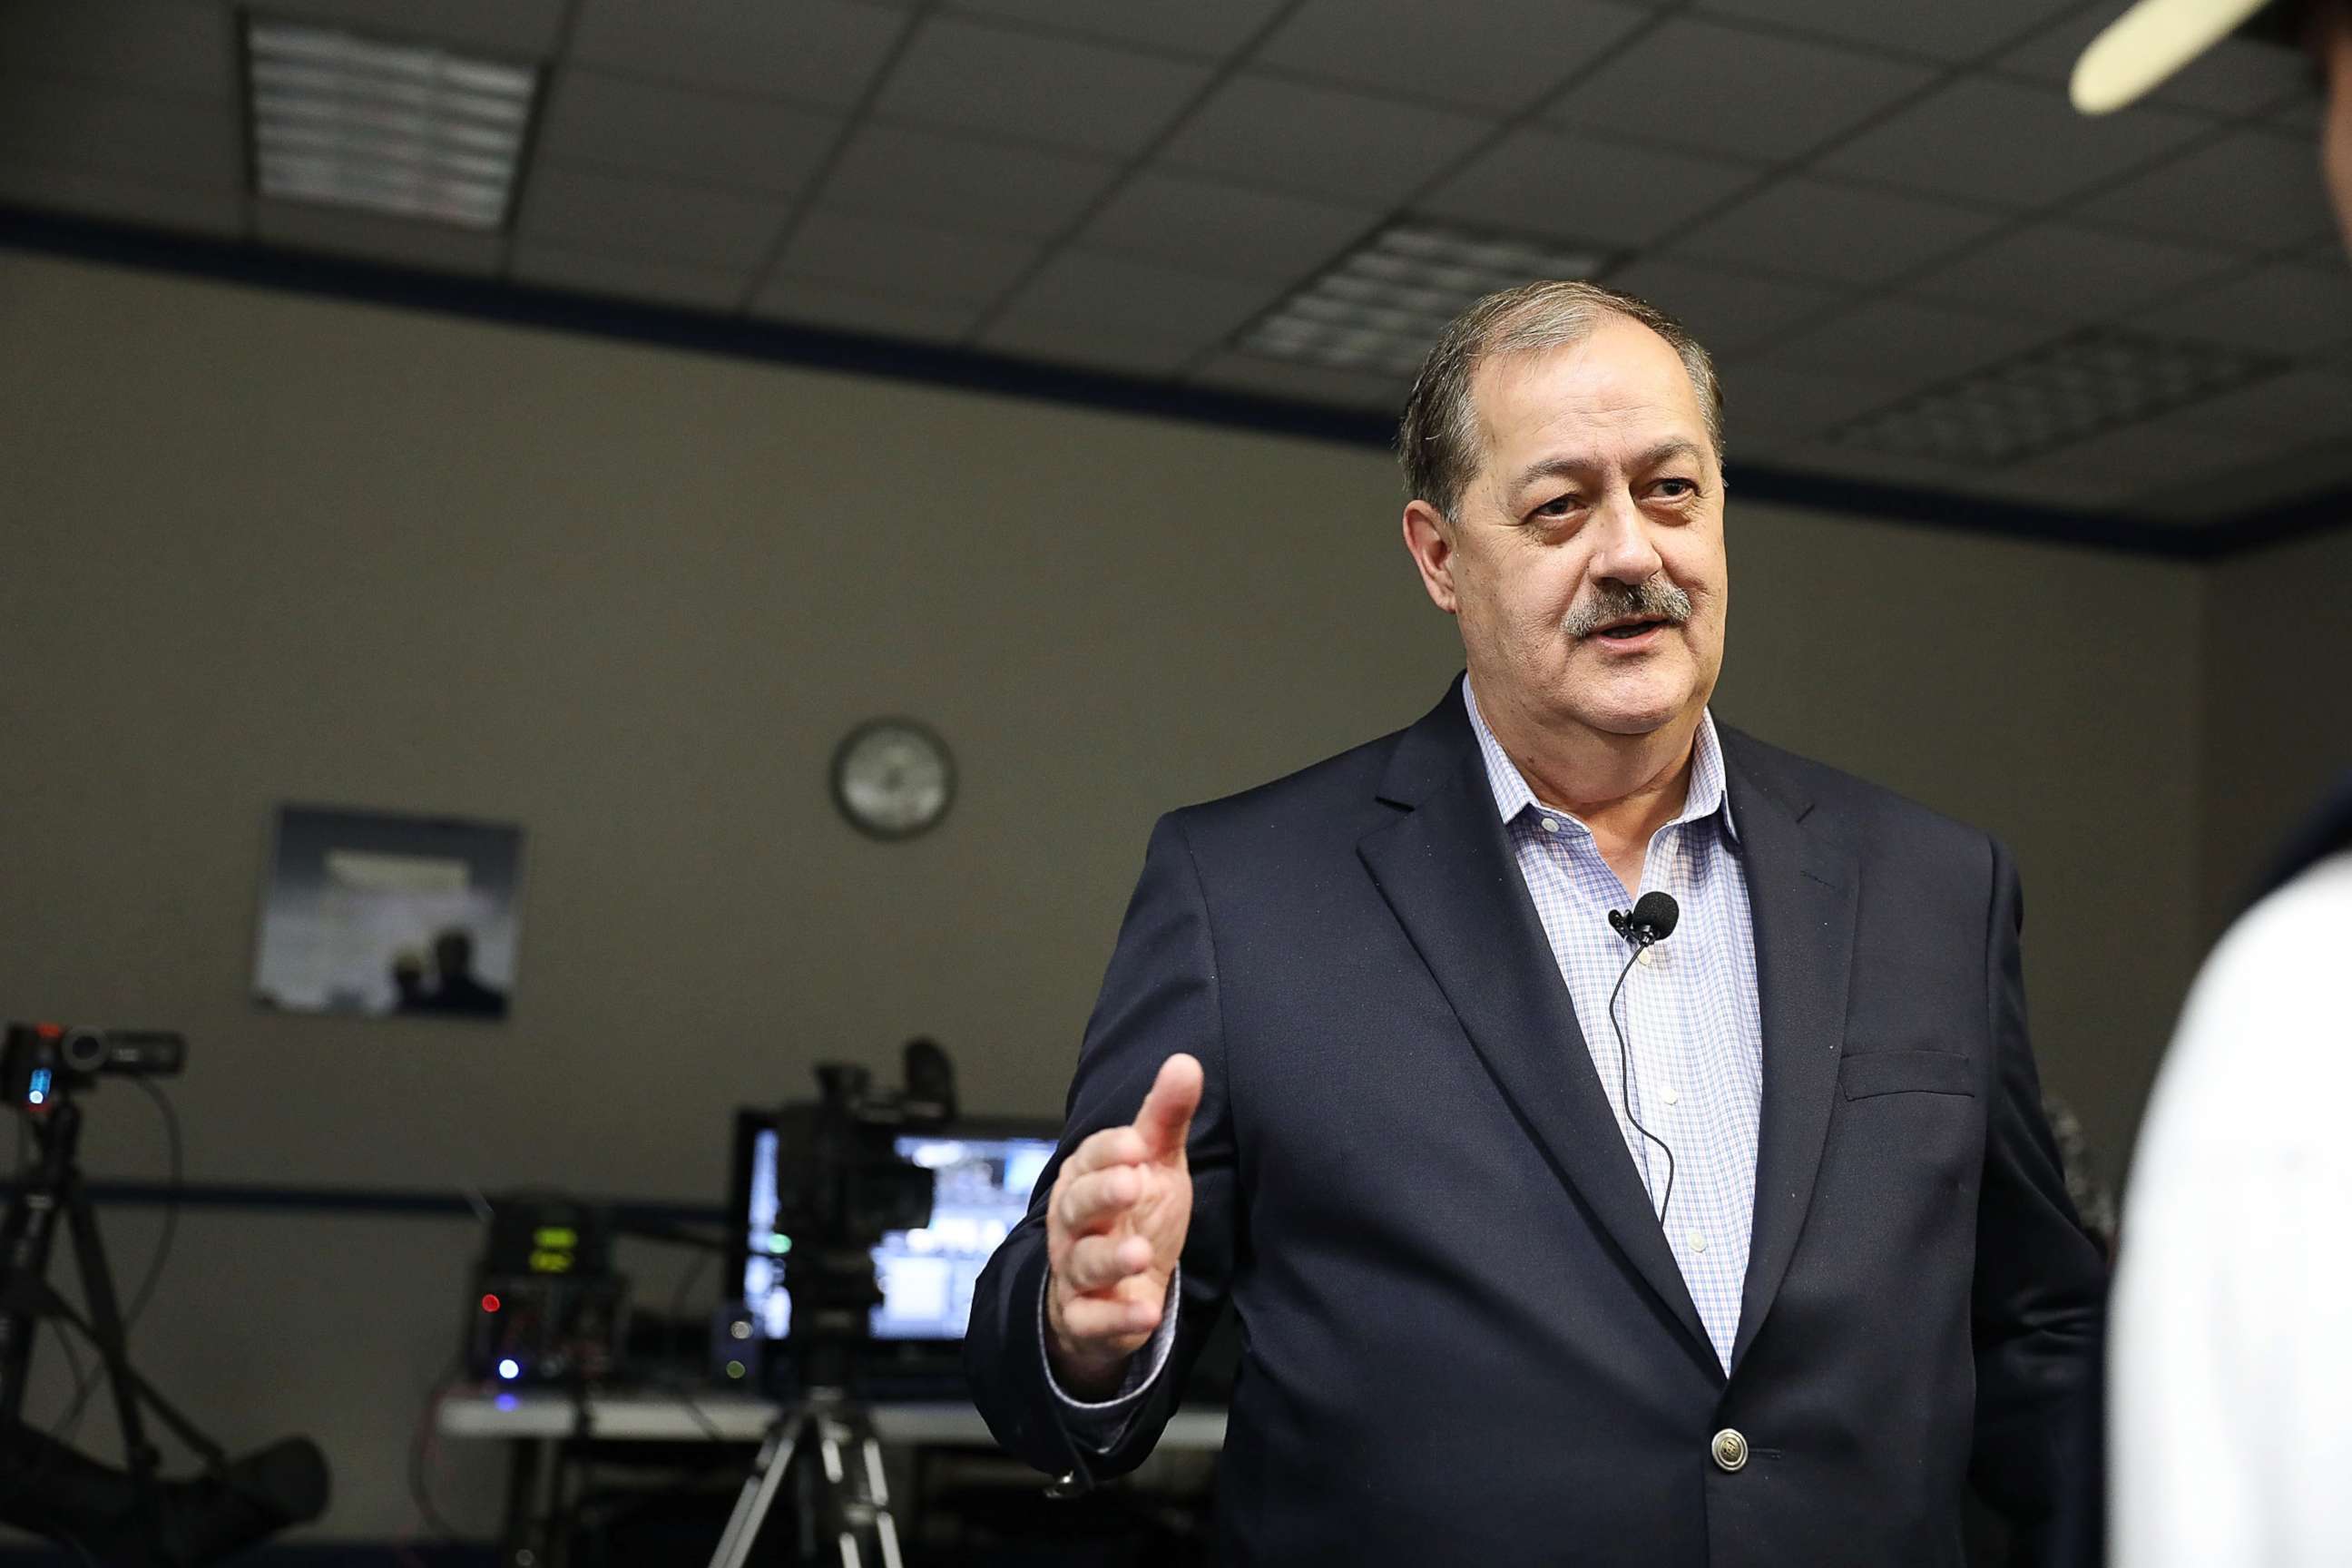 PHOTO: Republican candidate for U.S. Senate Don Blankenship speaks at a town hall meeting at West Virginia University on March 1, 2018 in Morgantown, W.,Va.